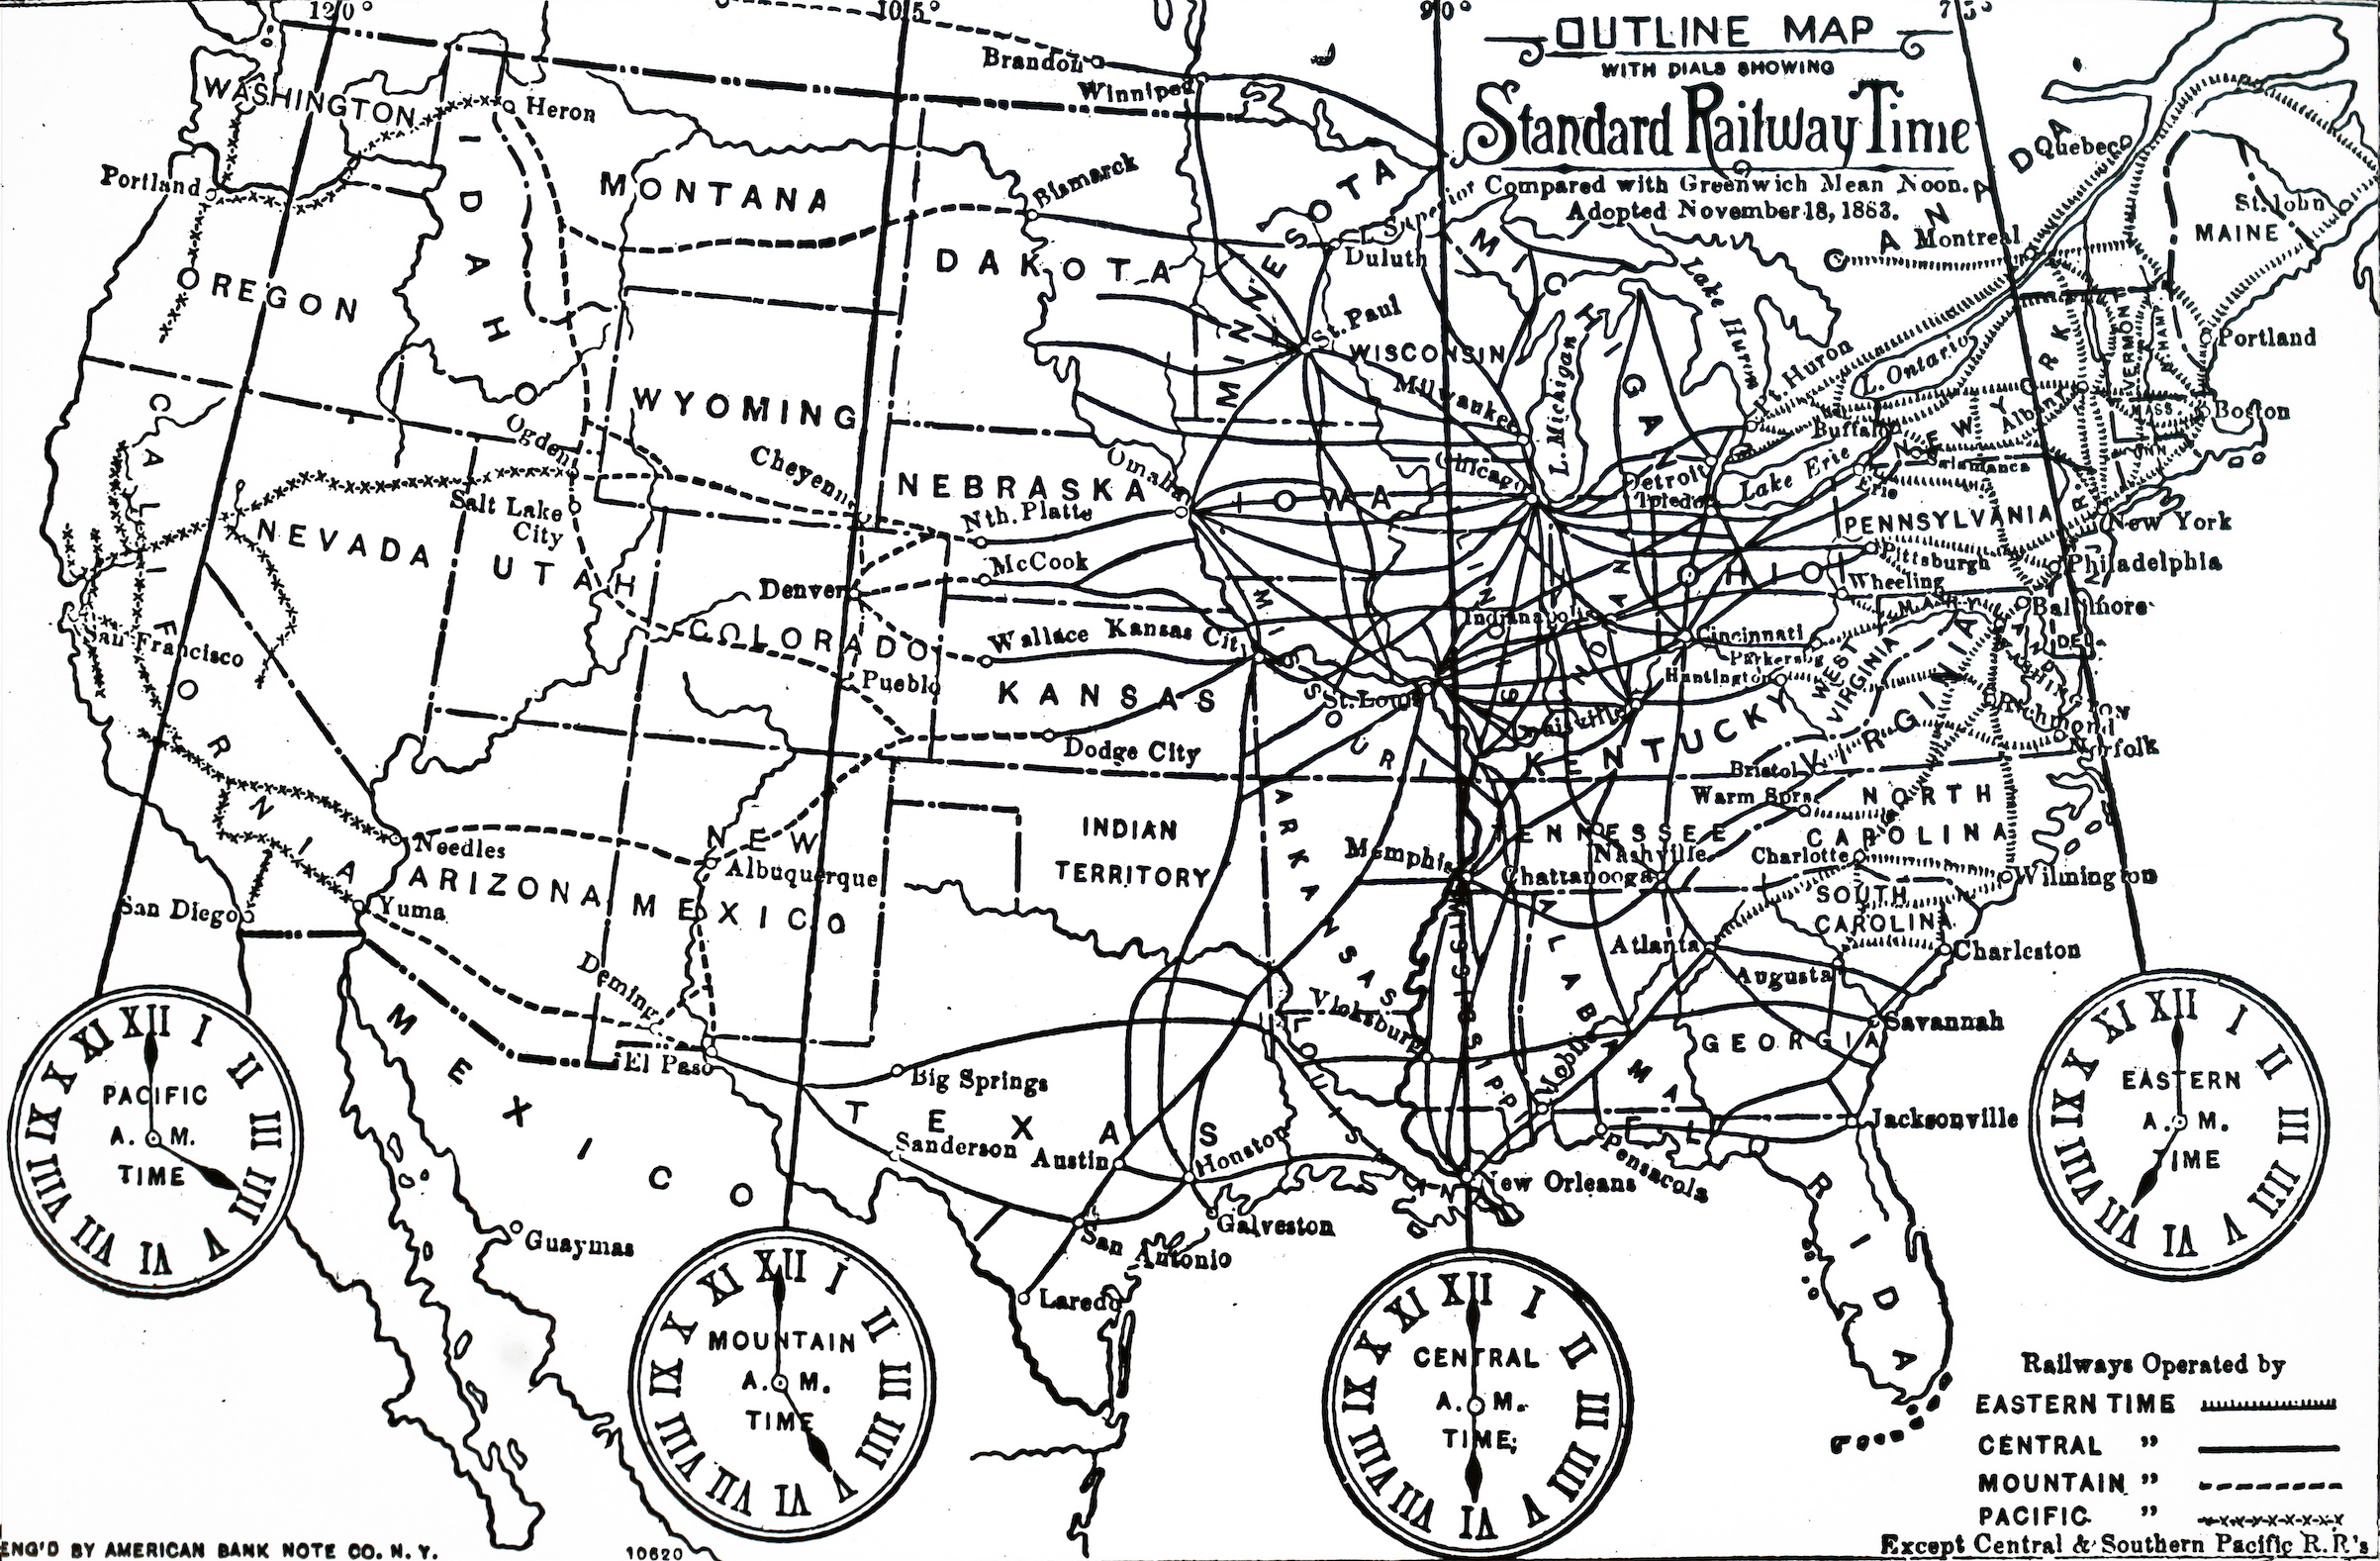 Map of time zones into which the U.S. was divided after the adoption of Standard Time on Nov. 18, 1883. Dated 19th century. (Universal History Archive/Group via Getty)